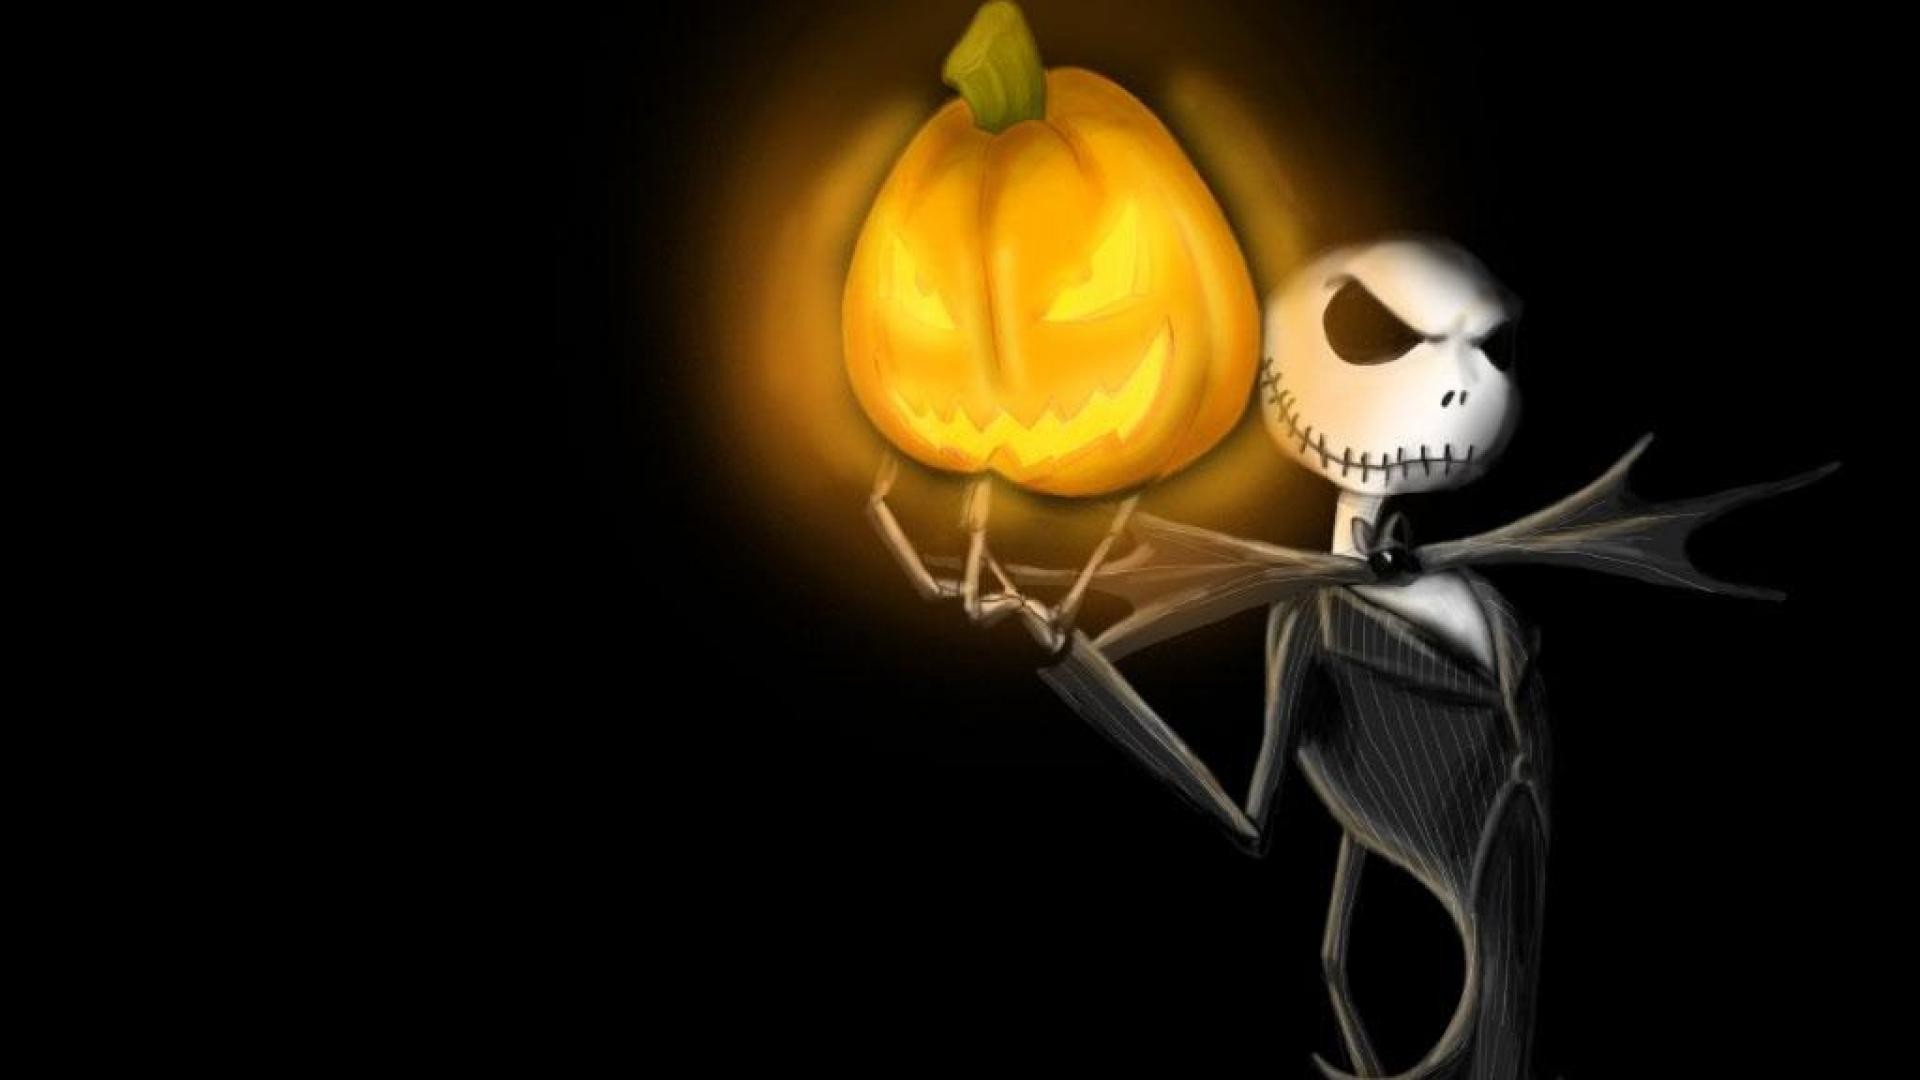 The Nightmare Before Christmas Wallpapers